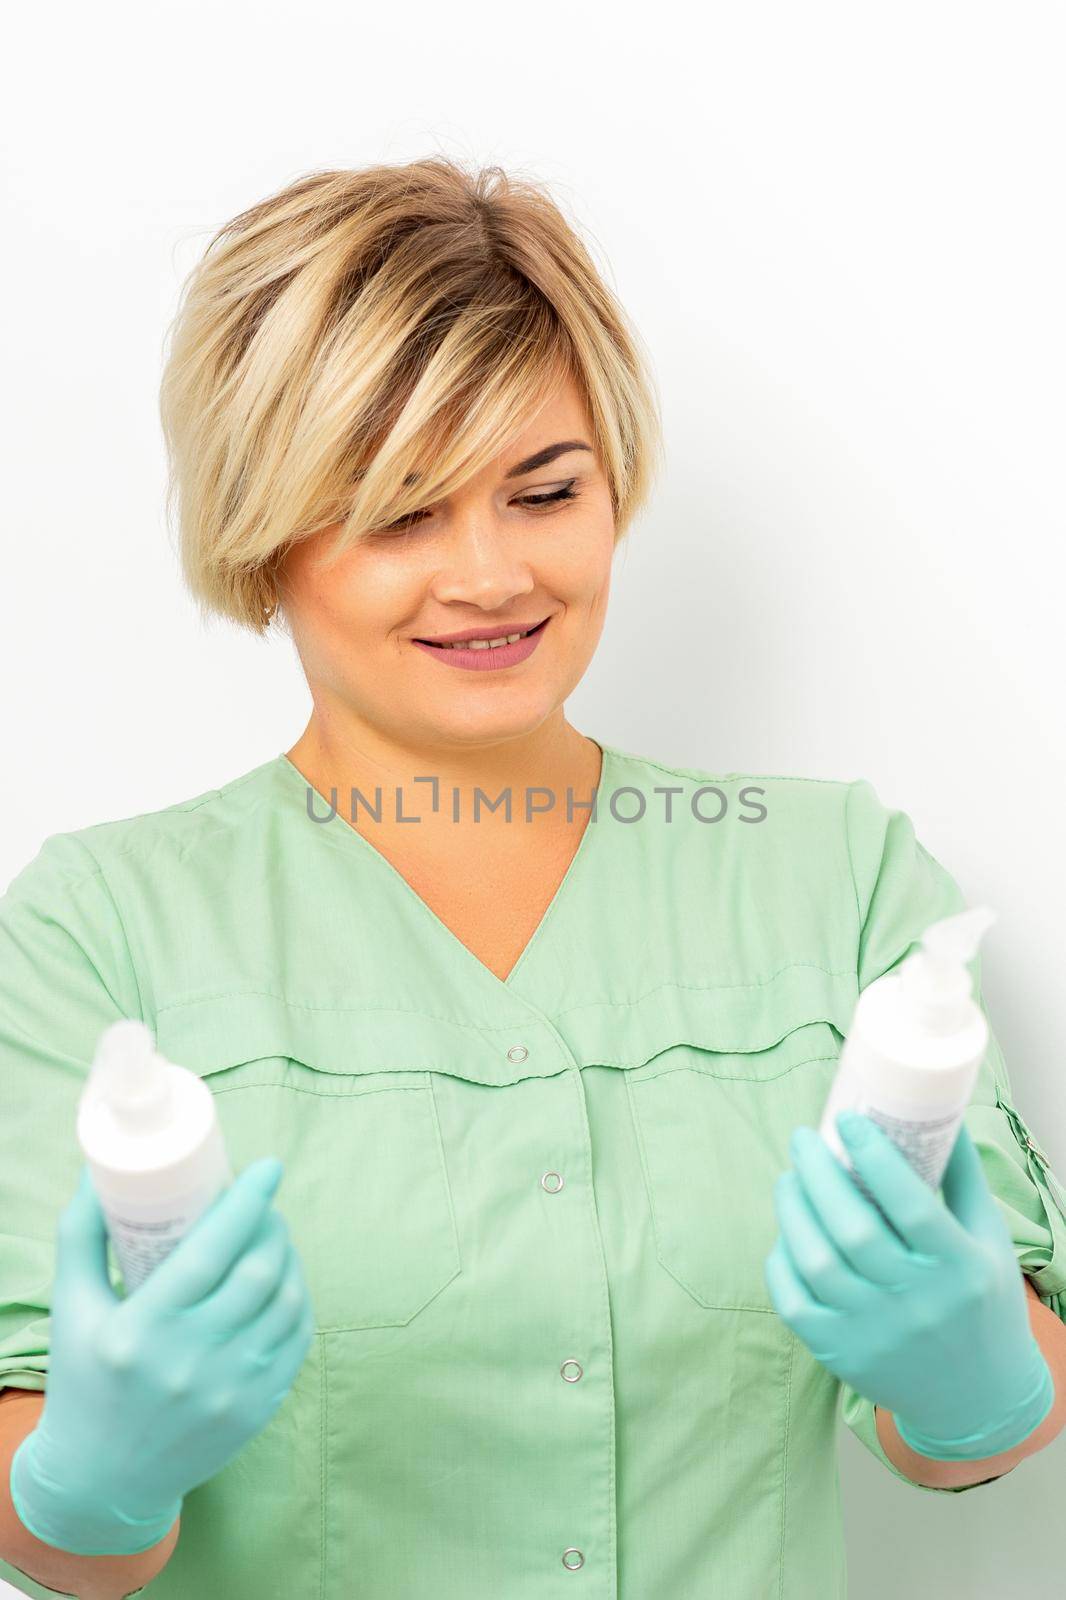 Cosmetics creams and skin care products in the hands of the female beautician smiling and standing over the white wall background. by okskukuruza